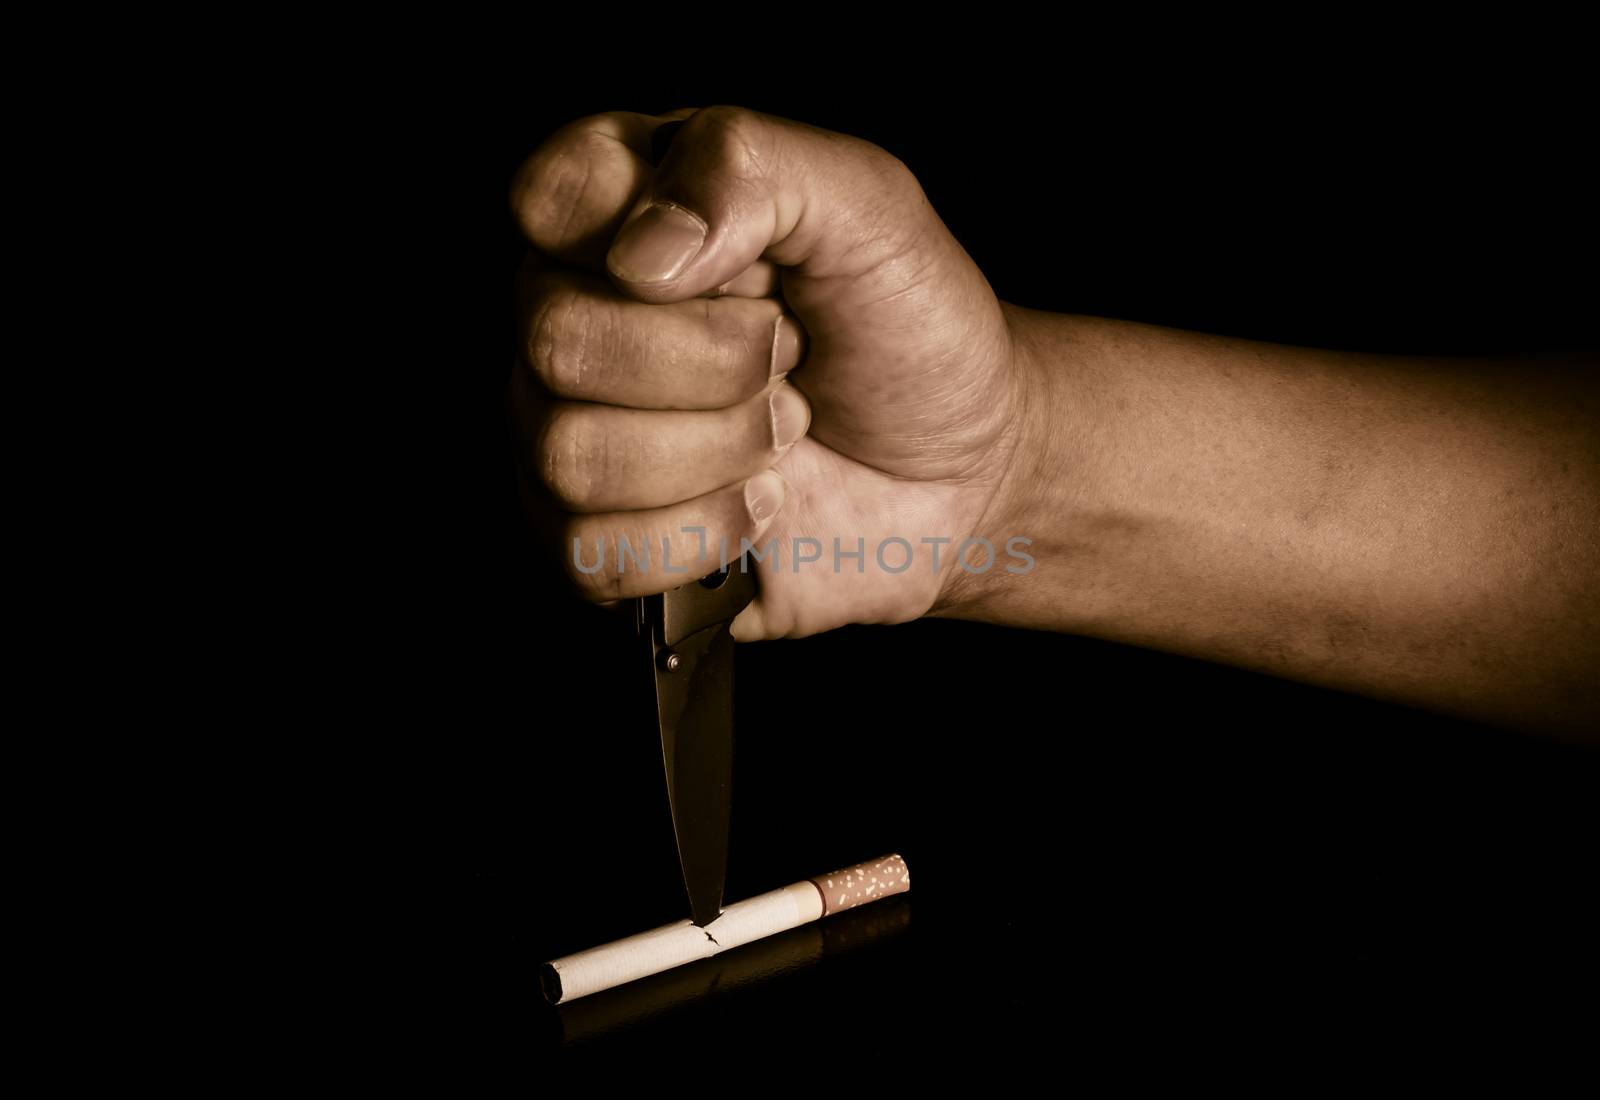 Handle knife stabbed into cigarettes concept eliminate smoking, quit smoking. by photobyphotoboy